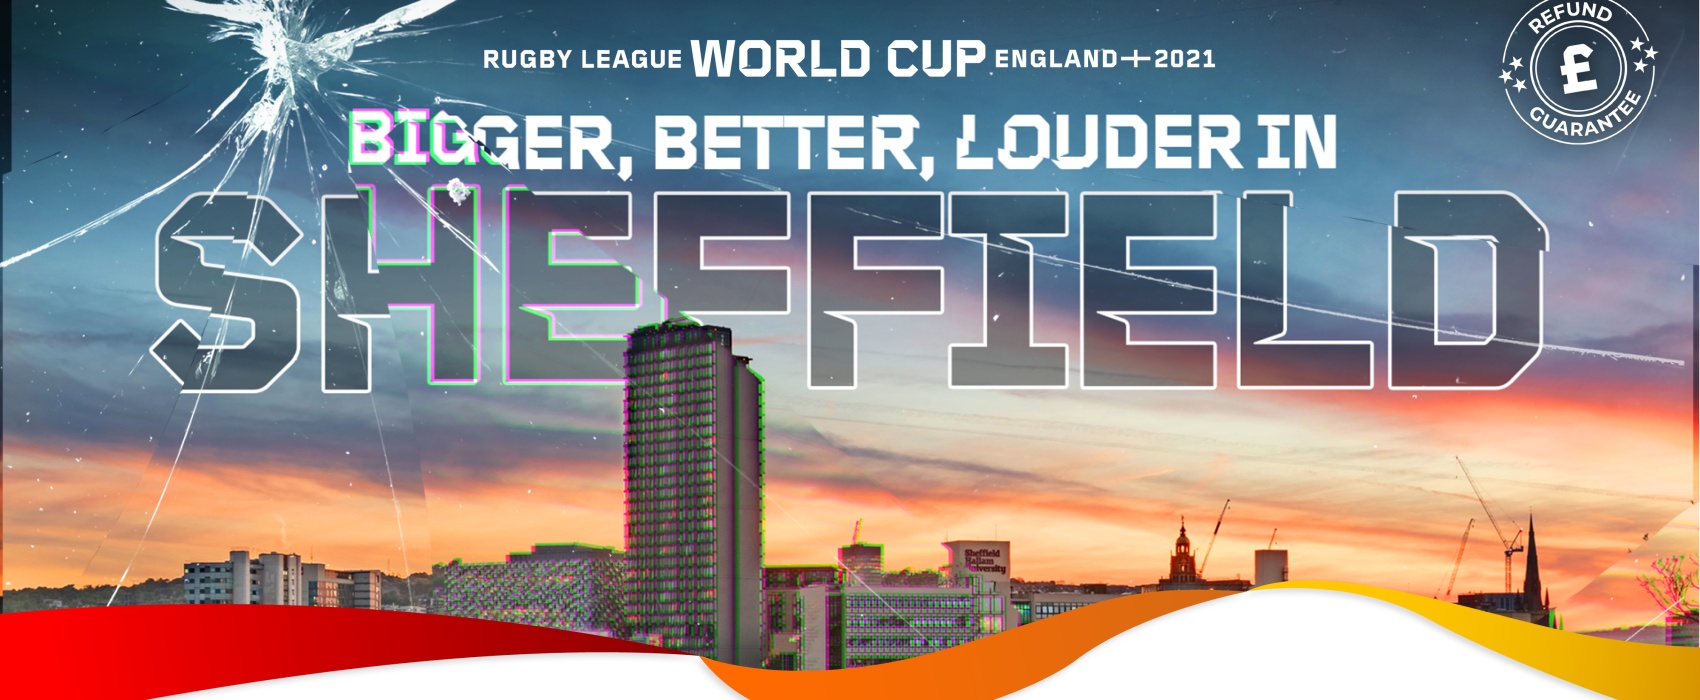 Schedule released for Rugby League World Cup